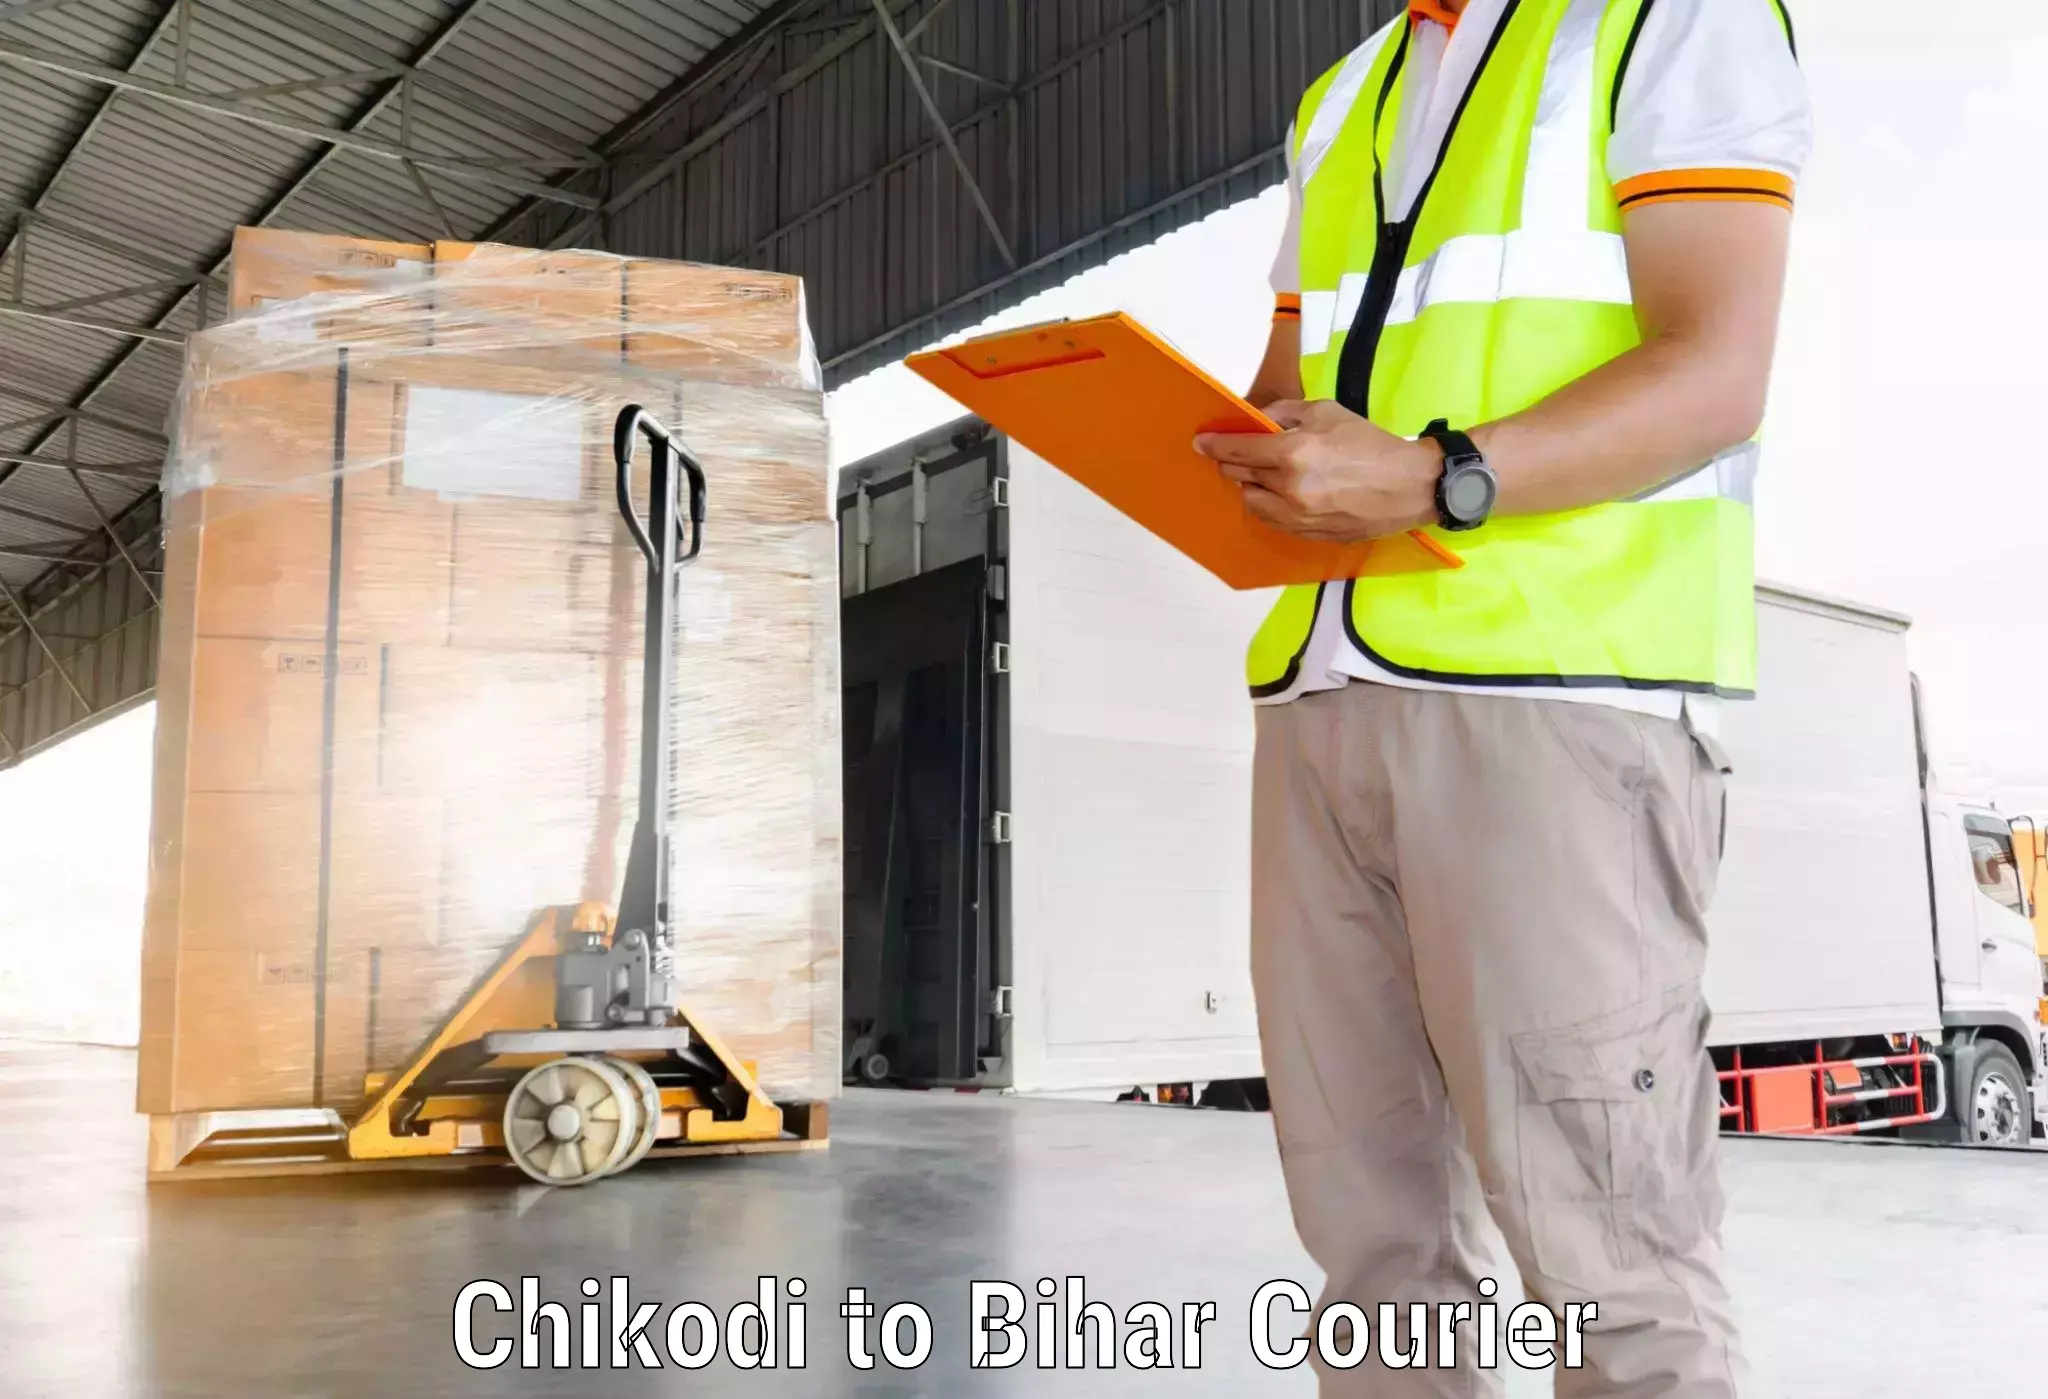 State-of-the-art courier technology Chikodi to Alamnagar